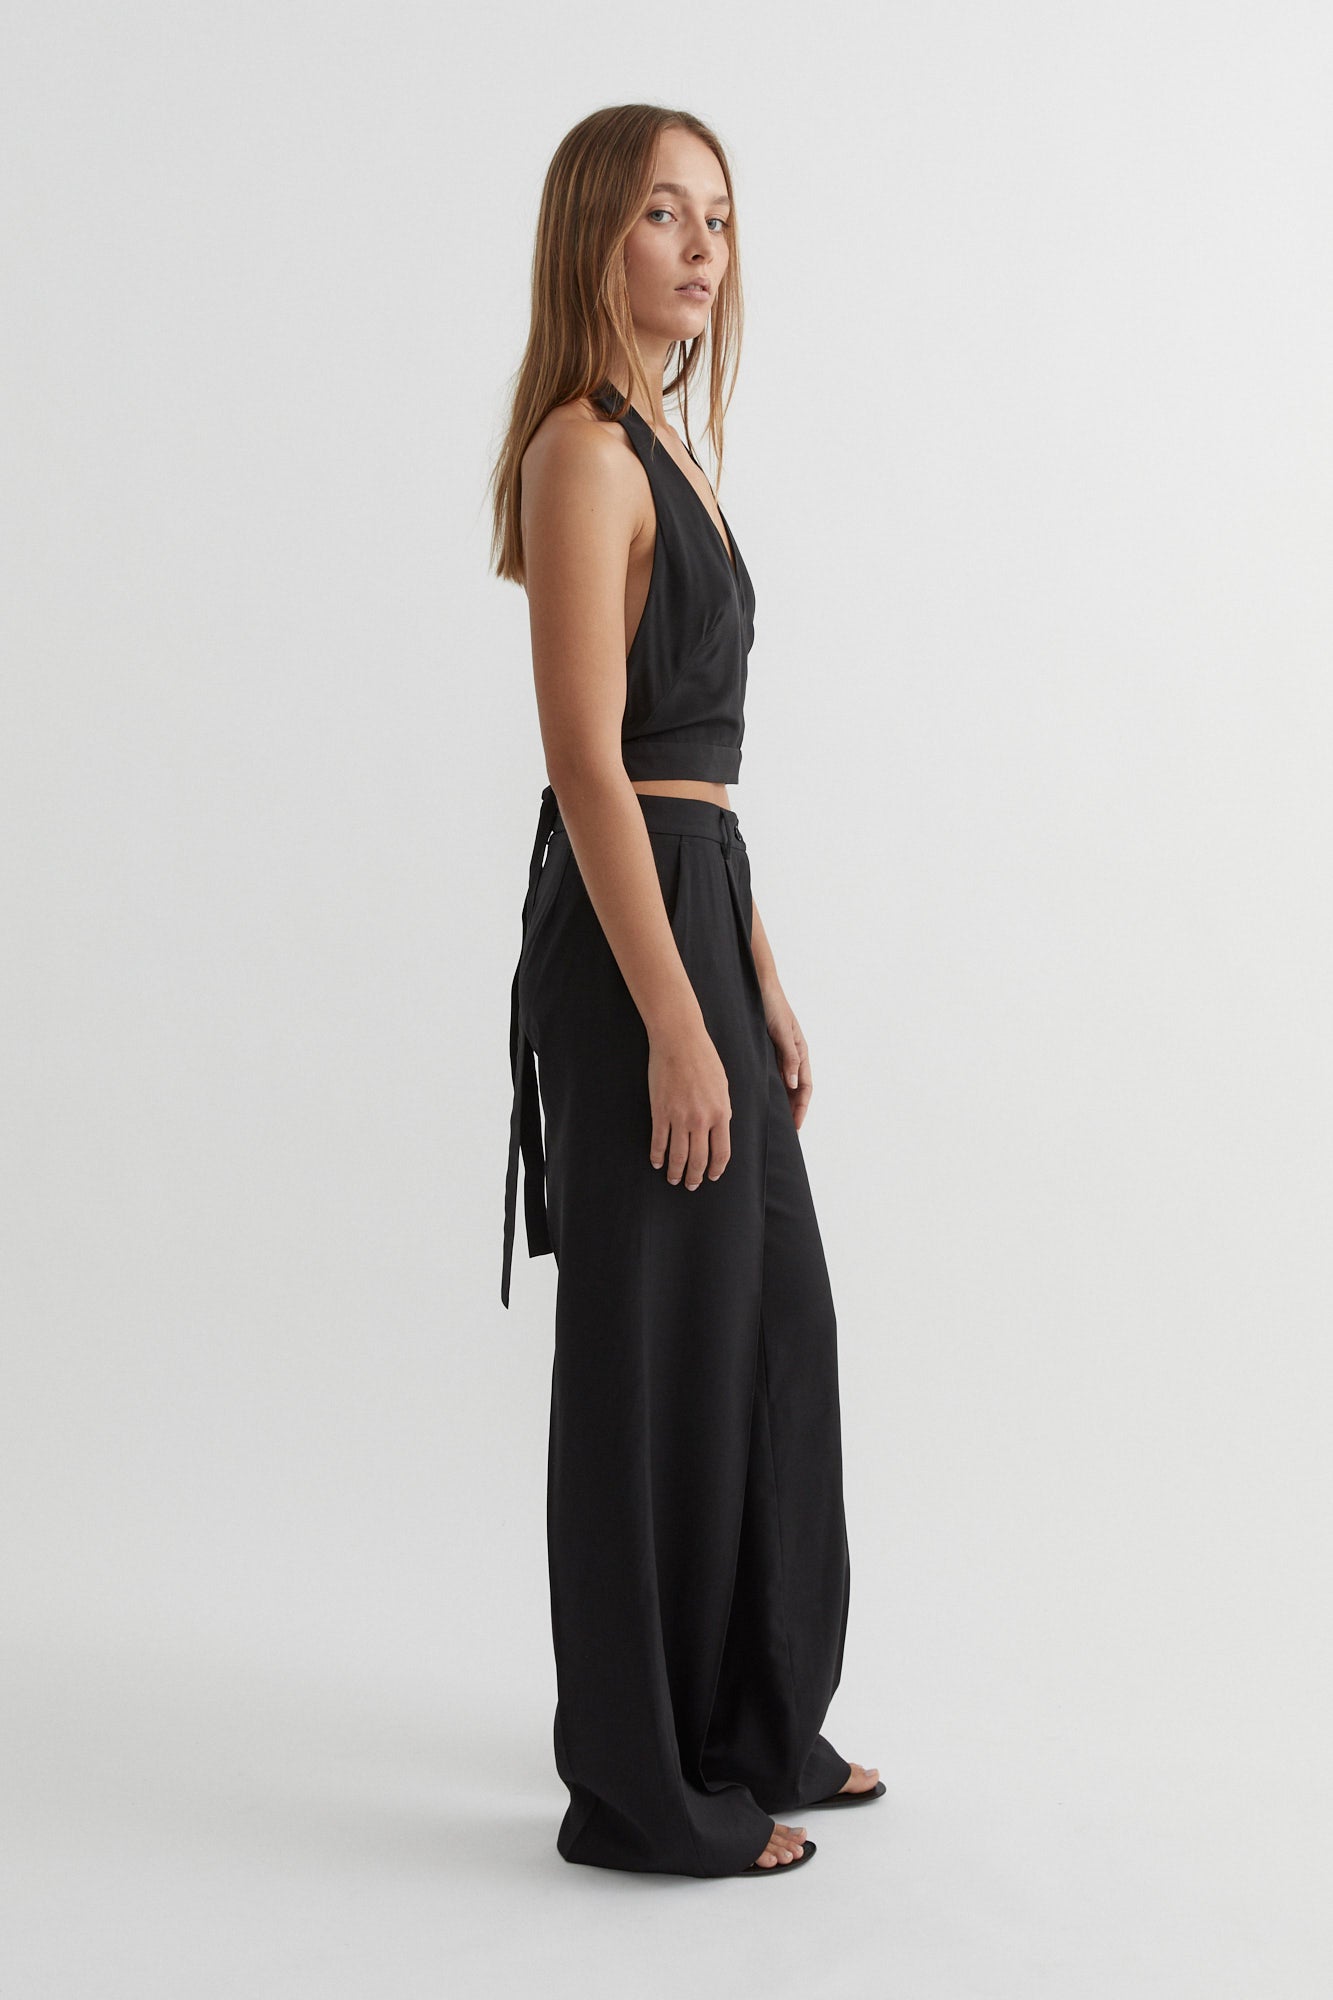 SAINT Lookbook Silk Halterneck Top black backless going out / party top. Made in Australia